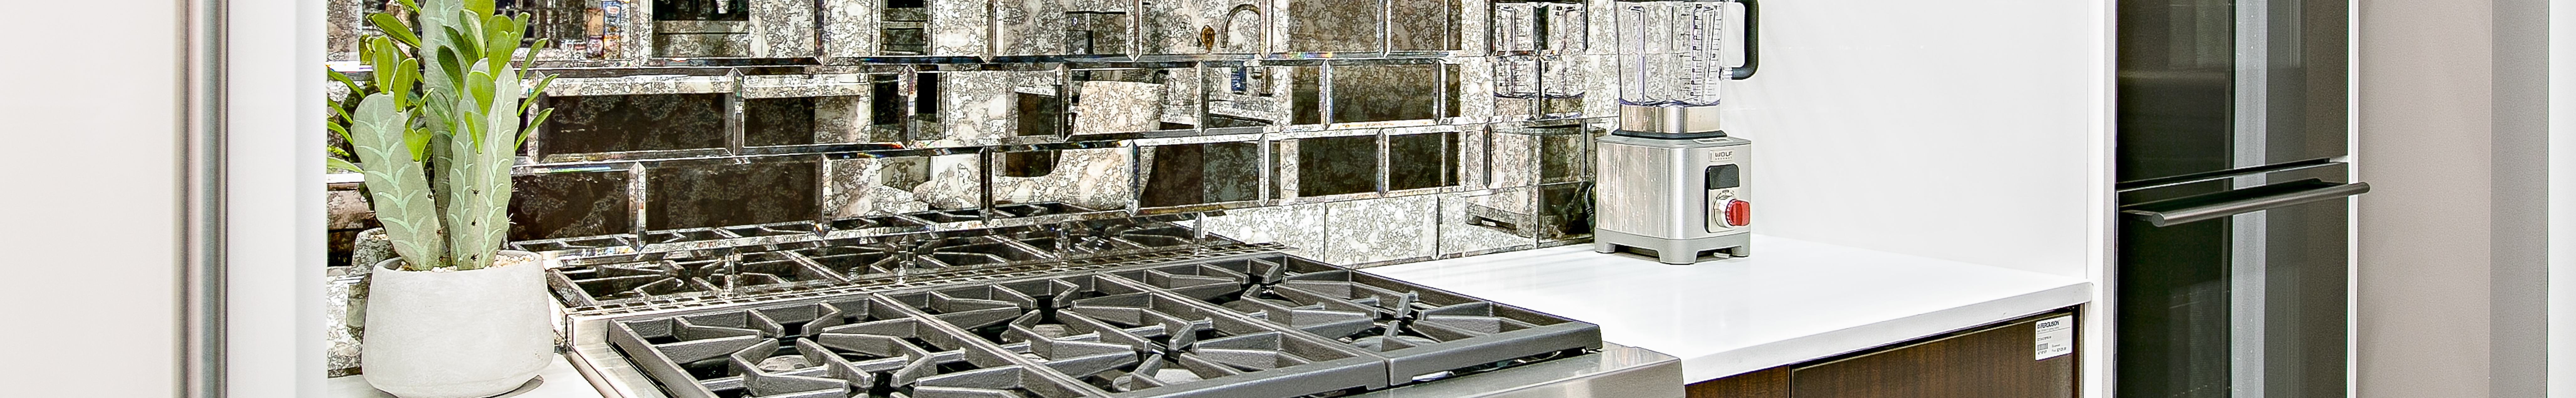 Make A Statement With Stone Countertops in Baton Rouge